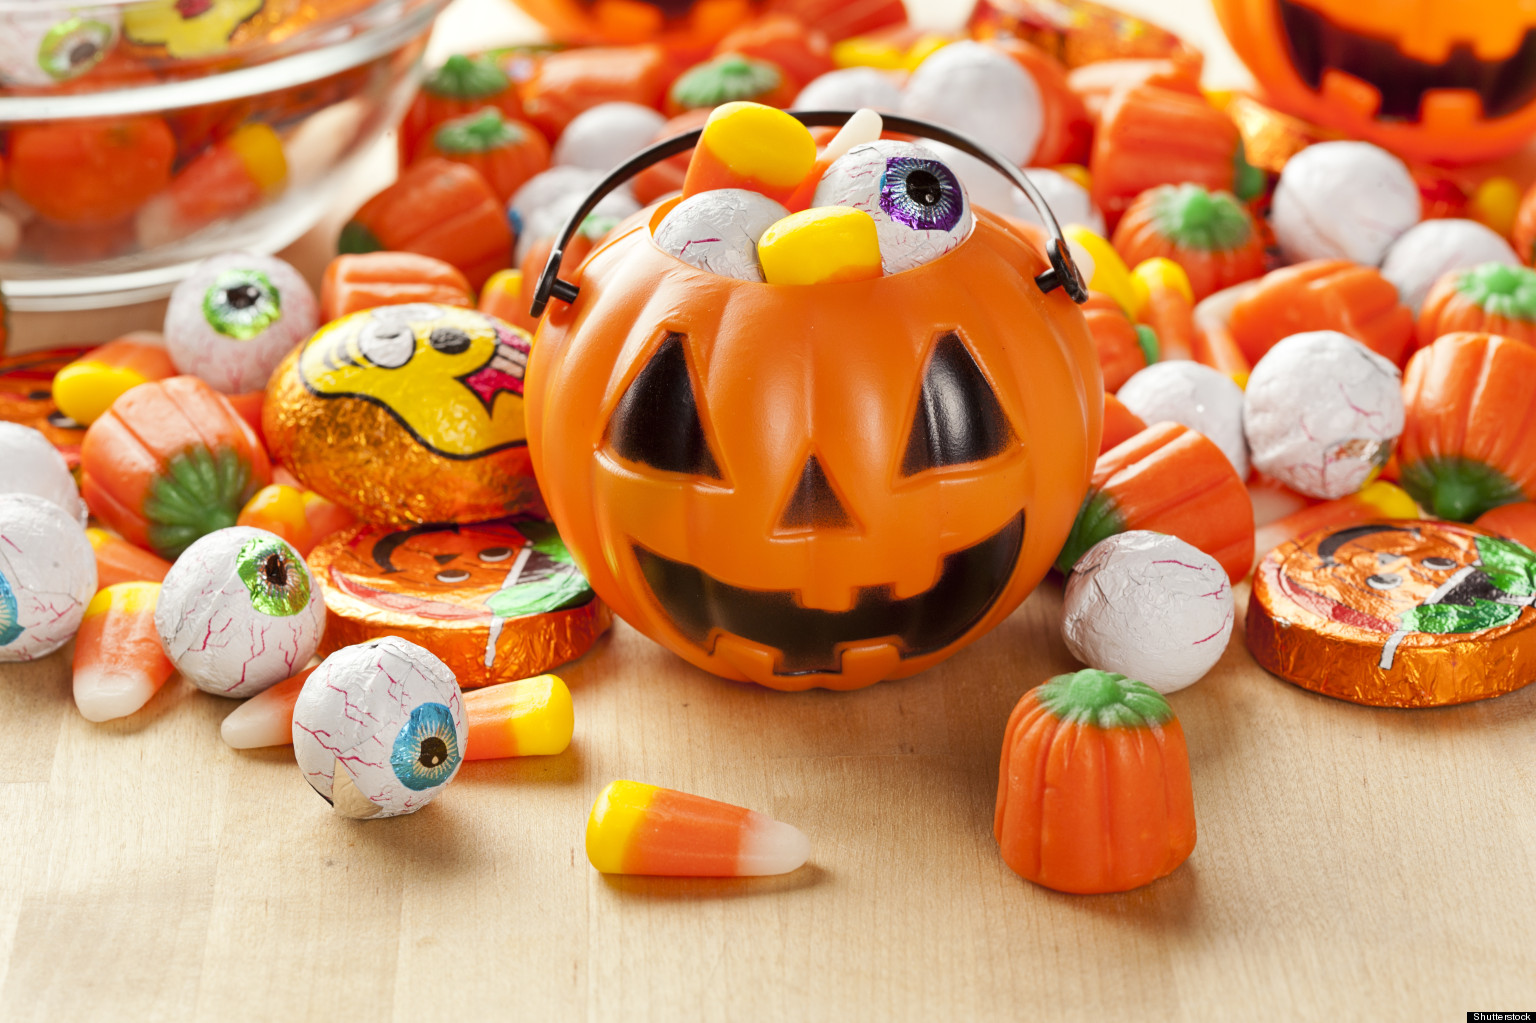 Gross Ingredients Lurking In Your Halloween Candy